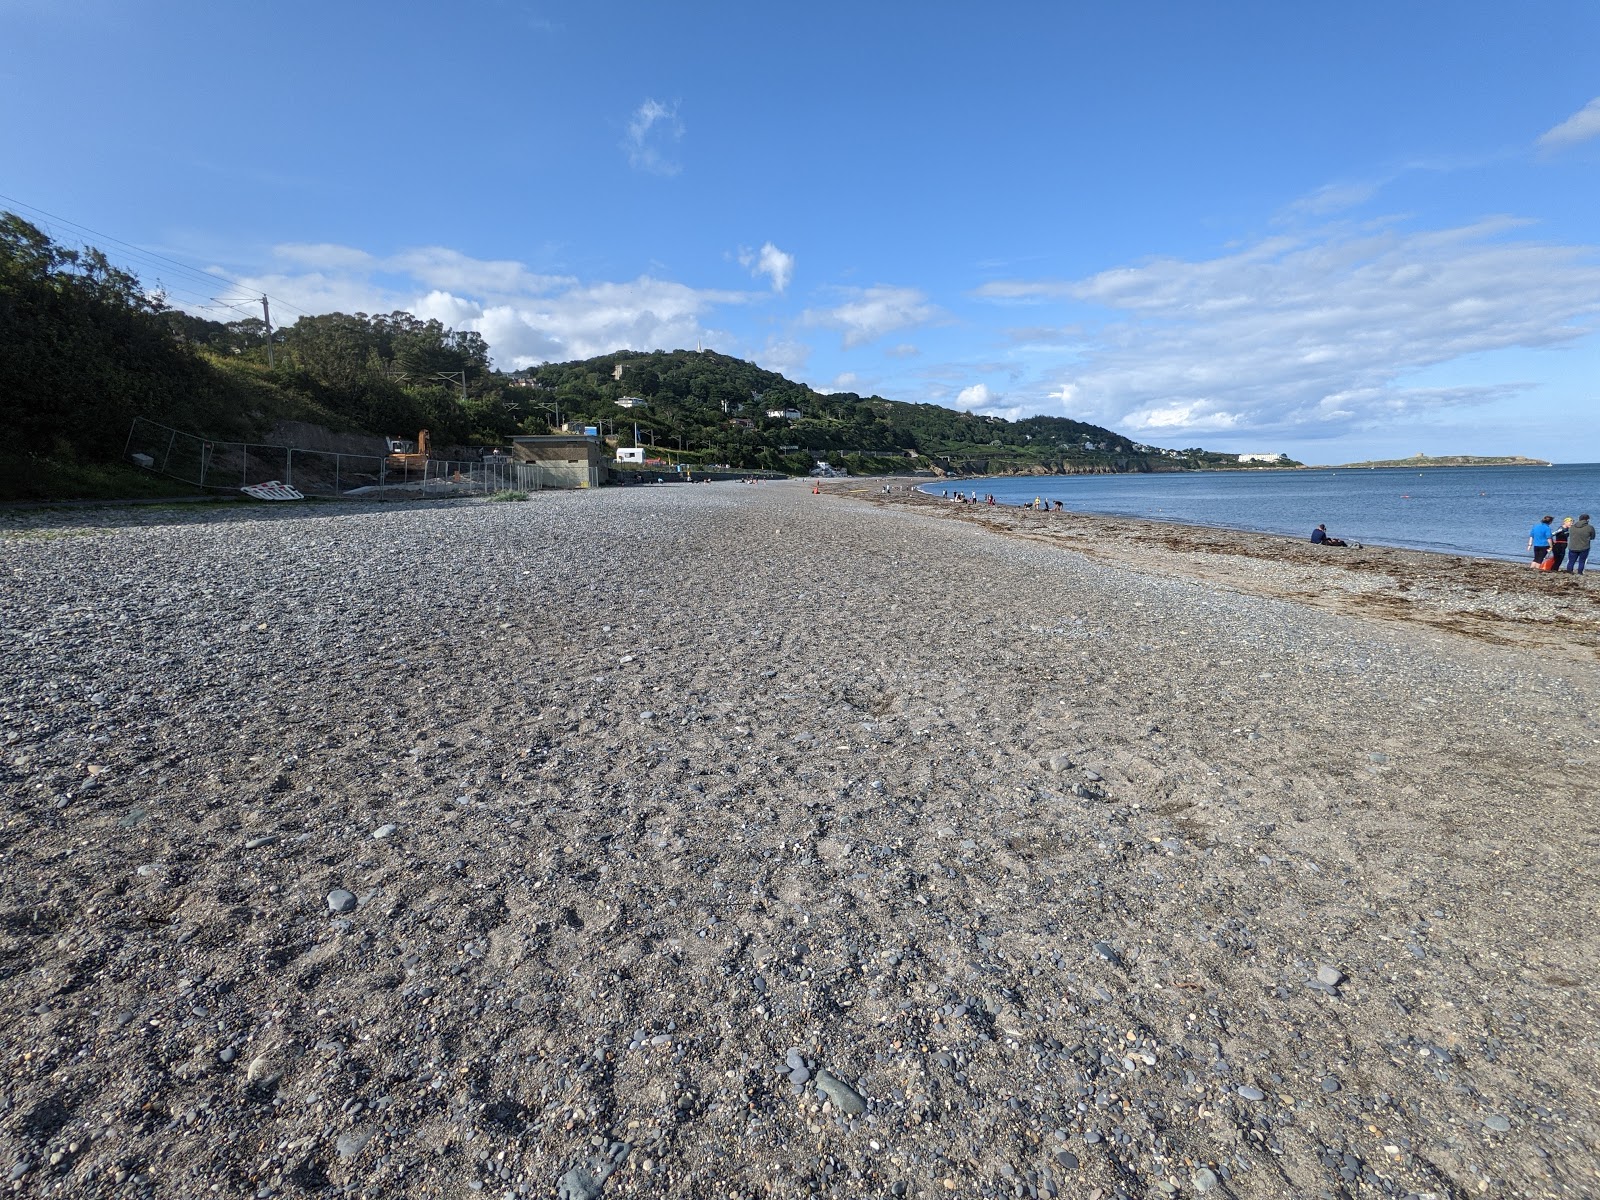 Photo of Killiney Strand and the settlement